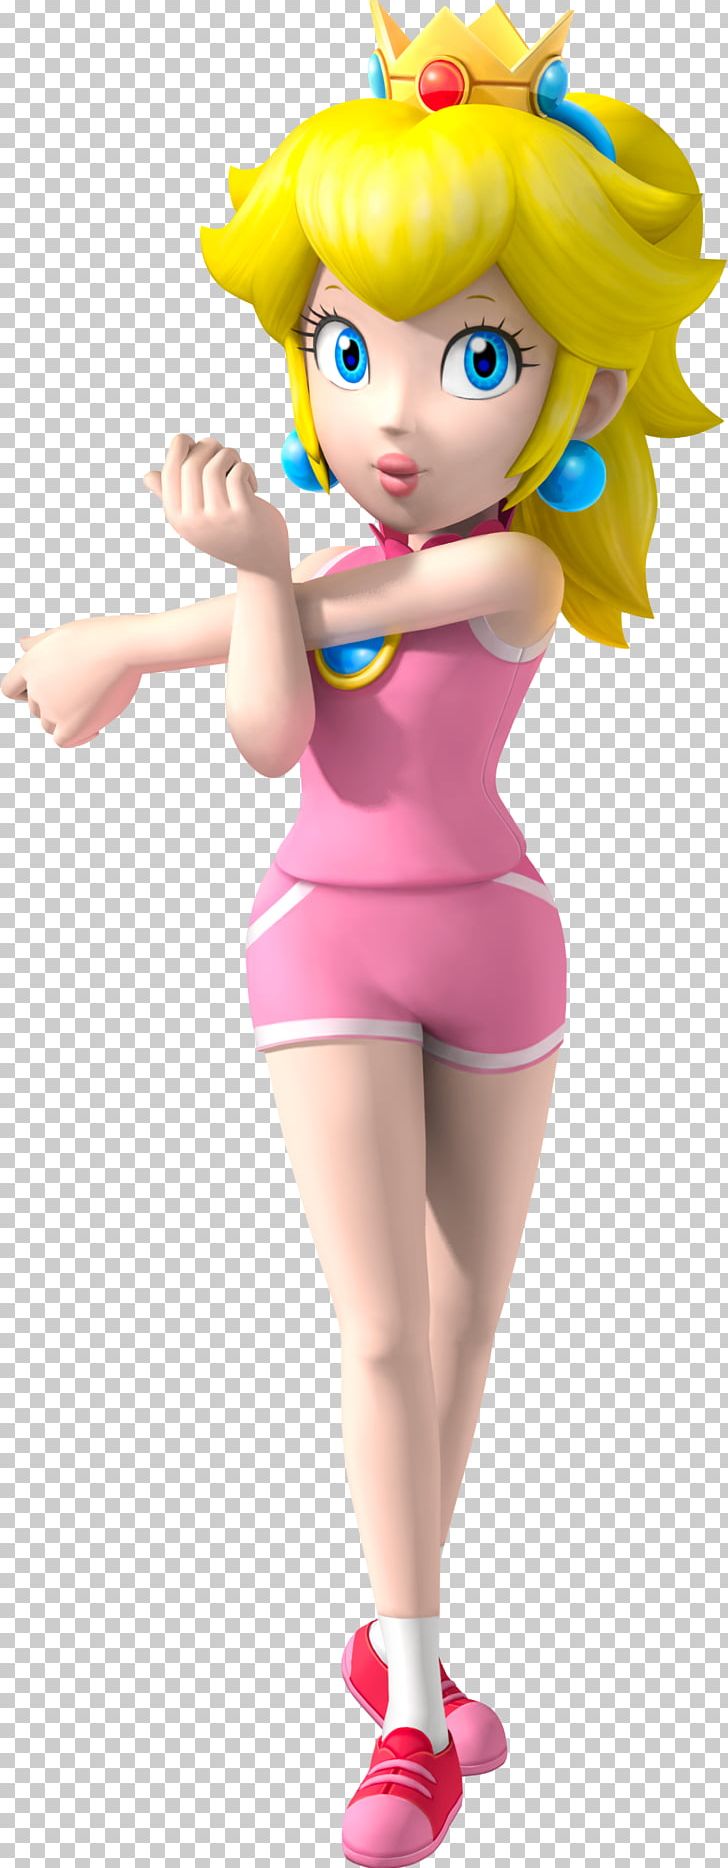 Princess Peach Princess Daisy Super Mario Bros. Rosalina PNG, Clipart, Action Figure, Doll, Fictional Character, Heroes, Hourglass Free PNG Download